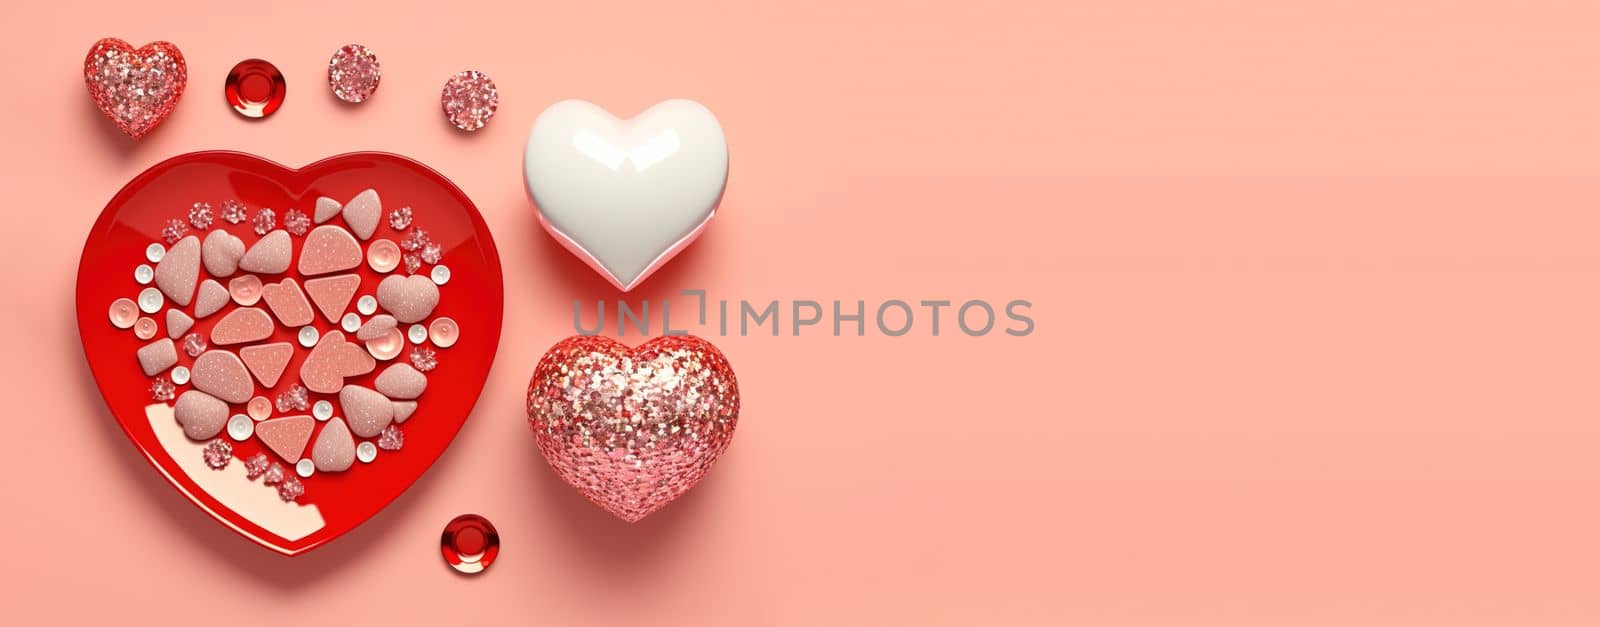 Gleaming 3D Heart, Diamond, and Crystal Illustration for Valentine's Day Banner by templator